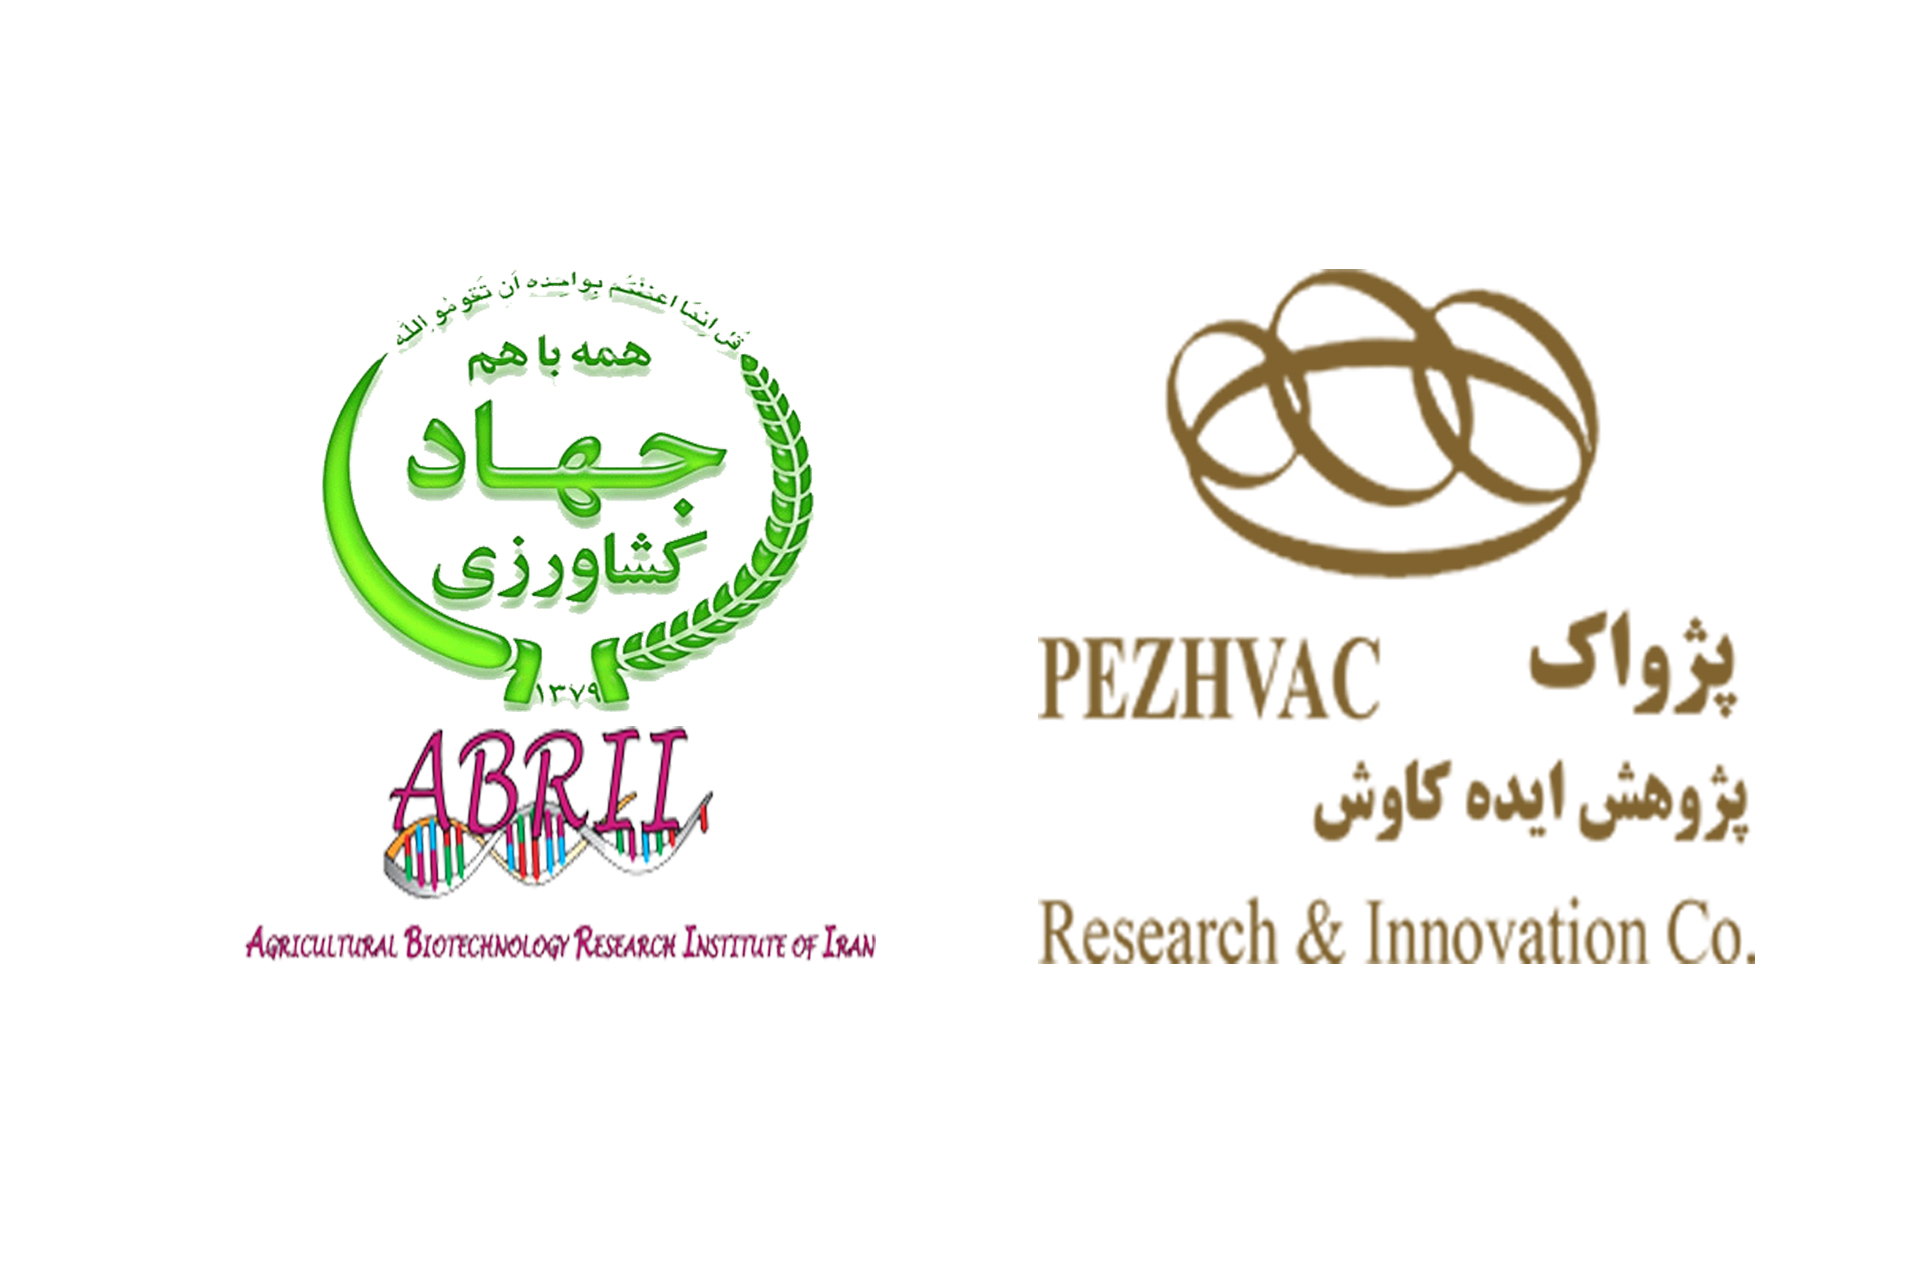 Accordance of head the Agricultural Biotechnology Research Institute (ABRII) on Economic Partnership in conjunction with indigenous and production of hybrid vegetable seeds with Pezhvac, Research and Innovation Co (Feb 2017).